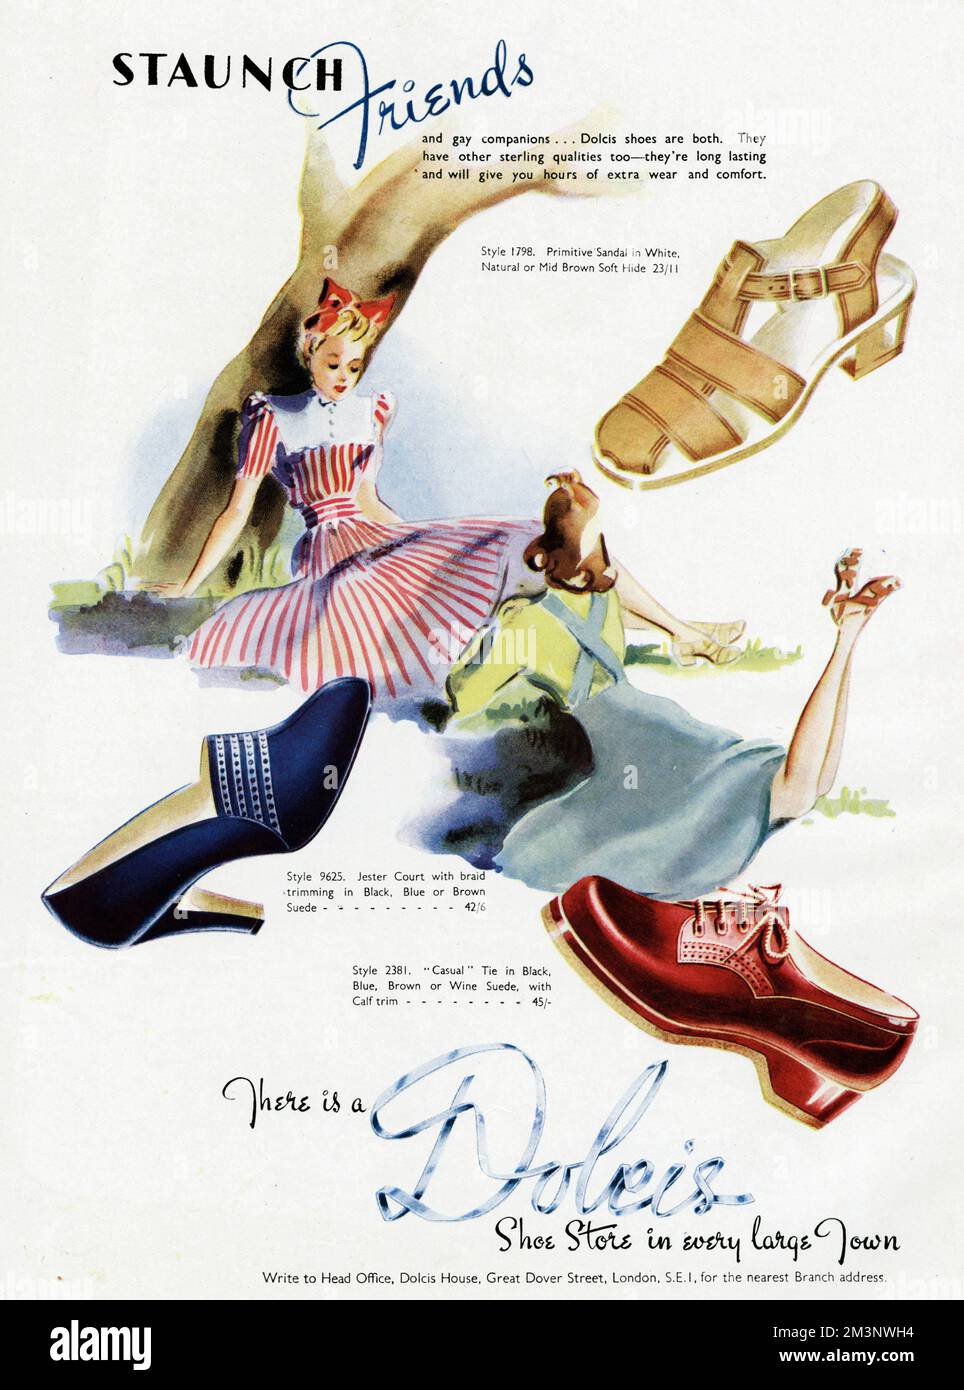 'Stauch friends'.  and gay companions . . . Dolis shoes are both.  They have other sterling qualities too - they're long lasting and will give you hours of extra wear and comfort.  1941 Stock Photo